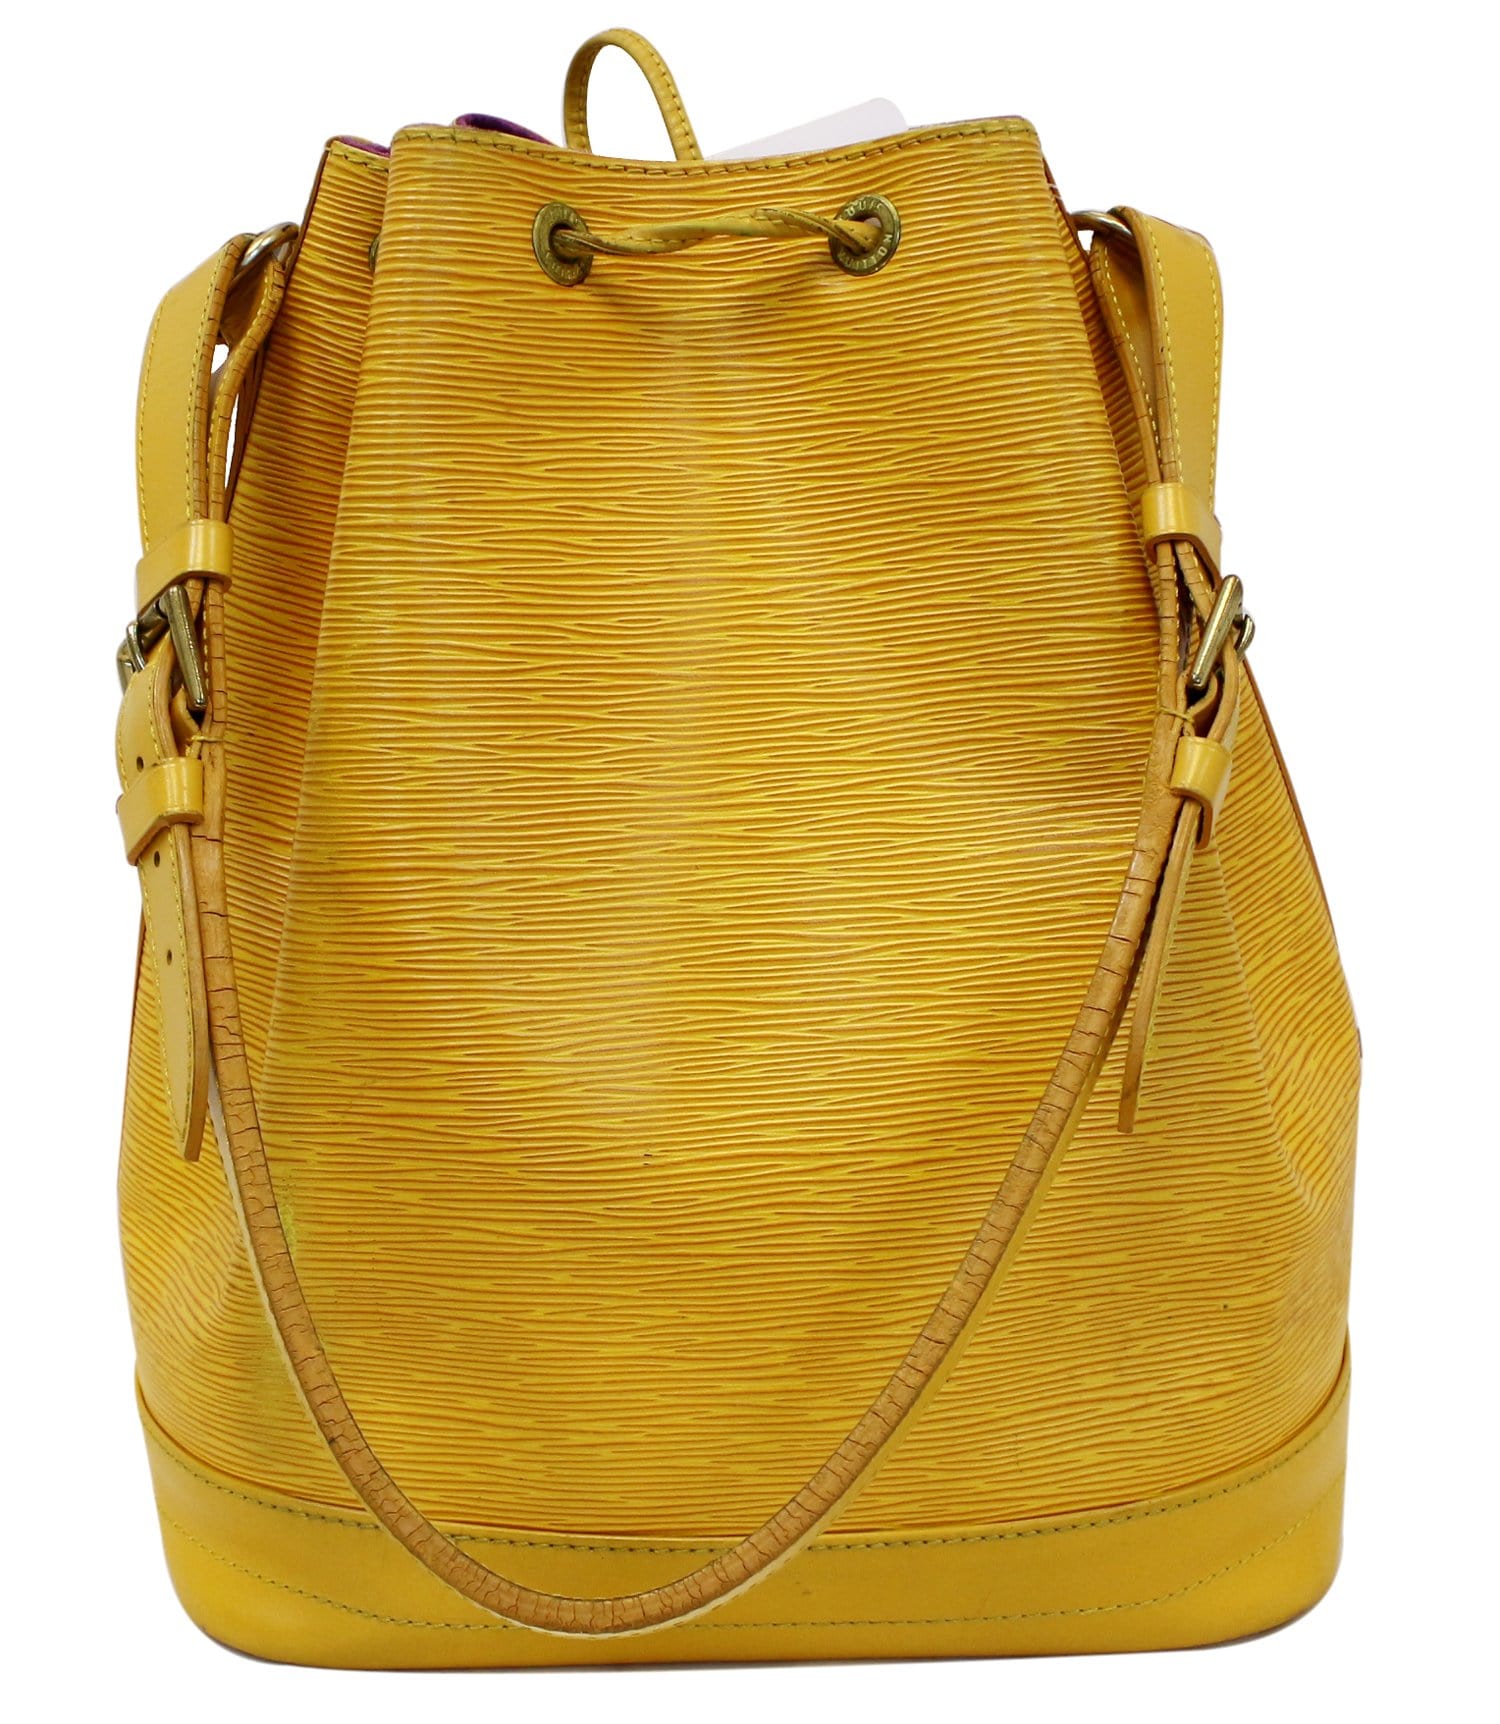 Louis Vuitton Twist Bucket Sac d'Epaule (Ultra Rare) with Pouch 869908 Yellow Leather Shoulder Bag